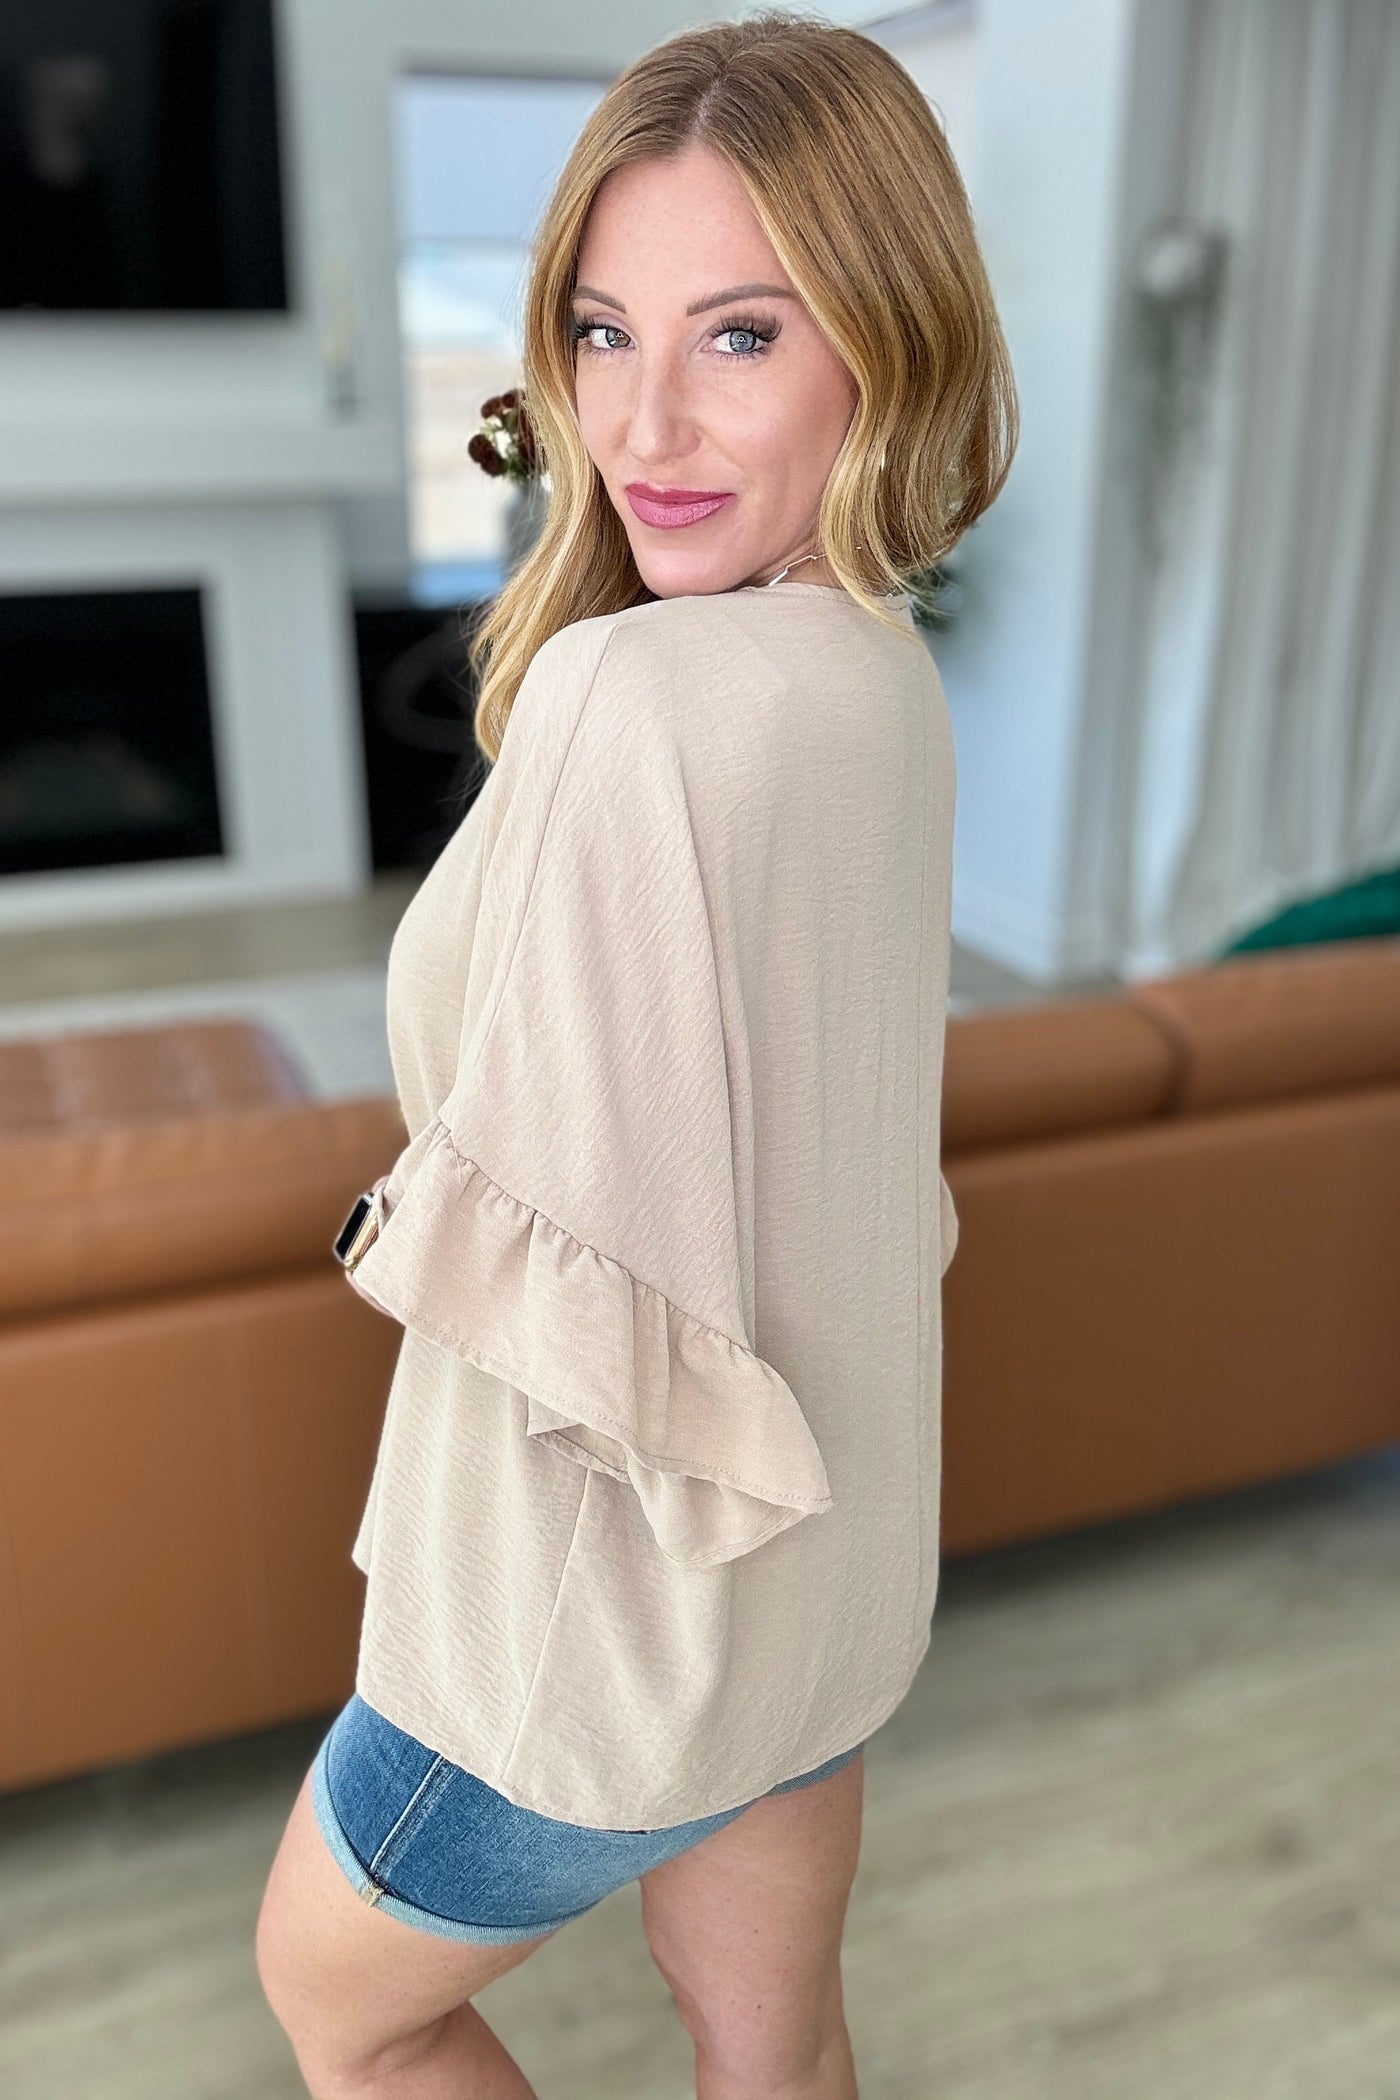 Airflow Peplum Ruffle Sleeve Top in Taupe-Tops-Ave Shops-Market Street Nest, Fashionable Clothing, Shoes and Home Décor Located in Mabank, TX